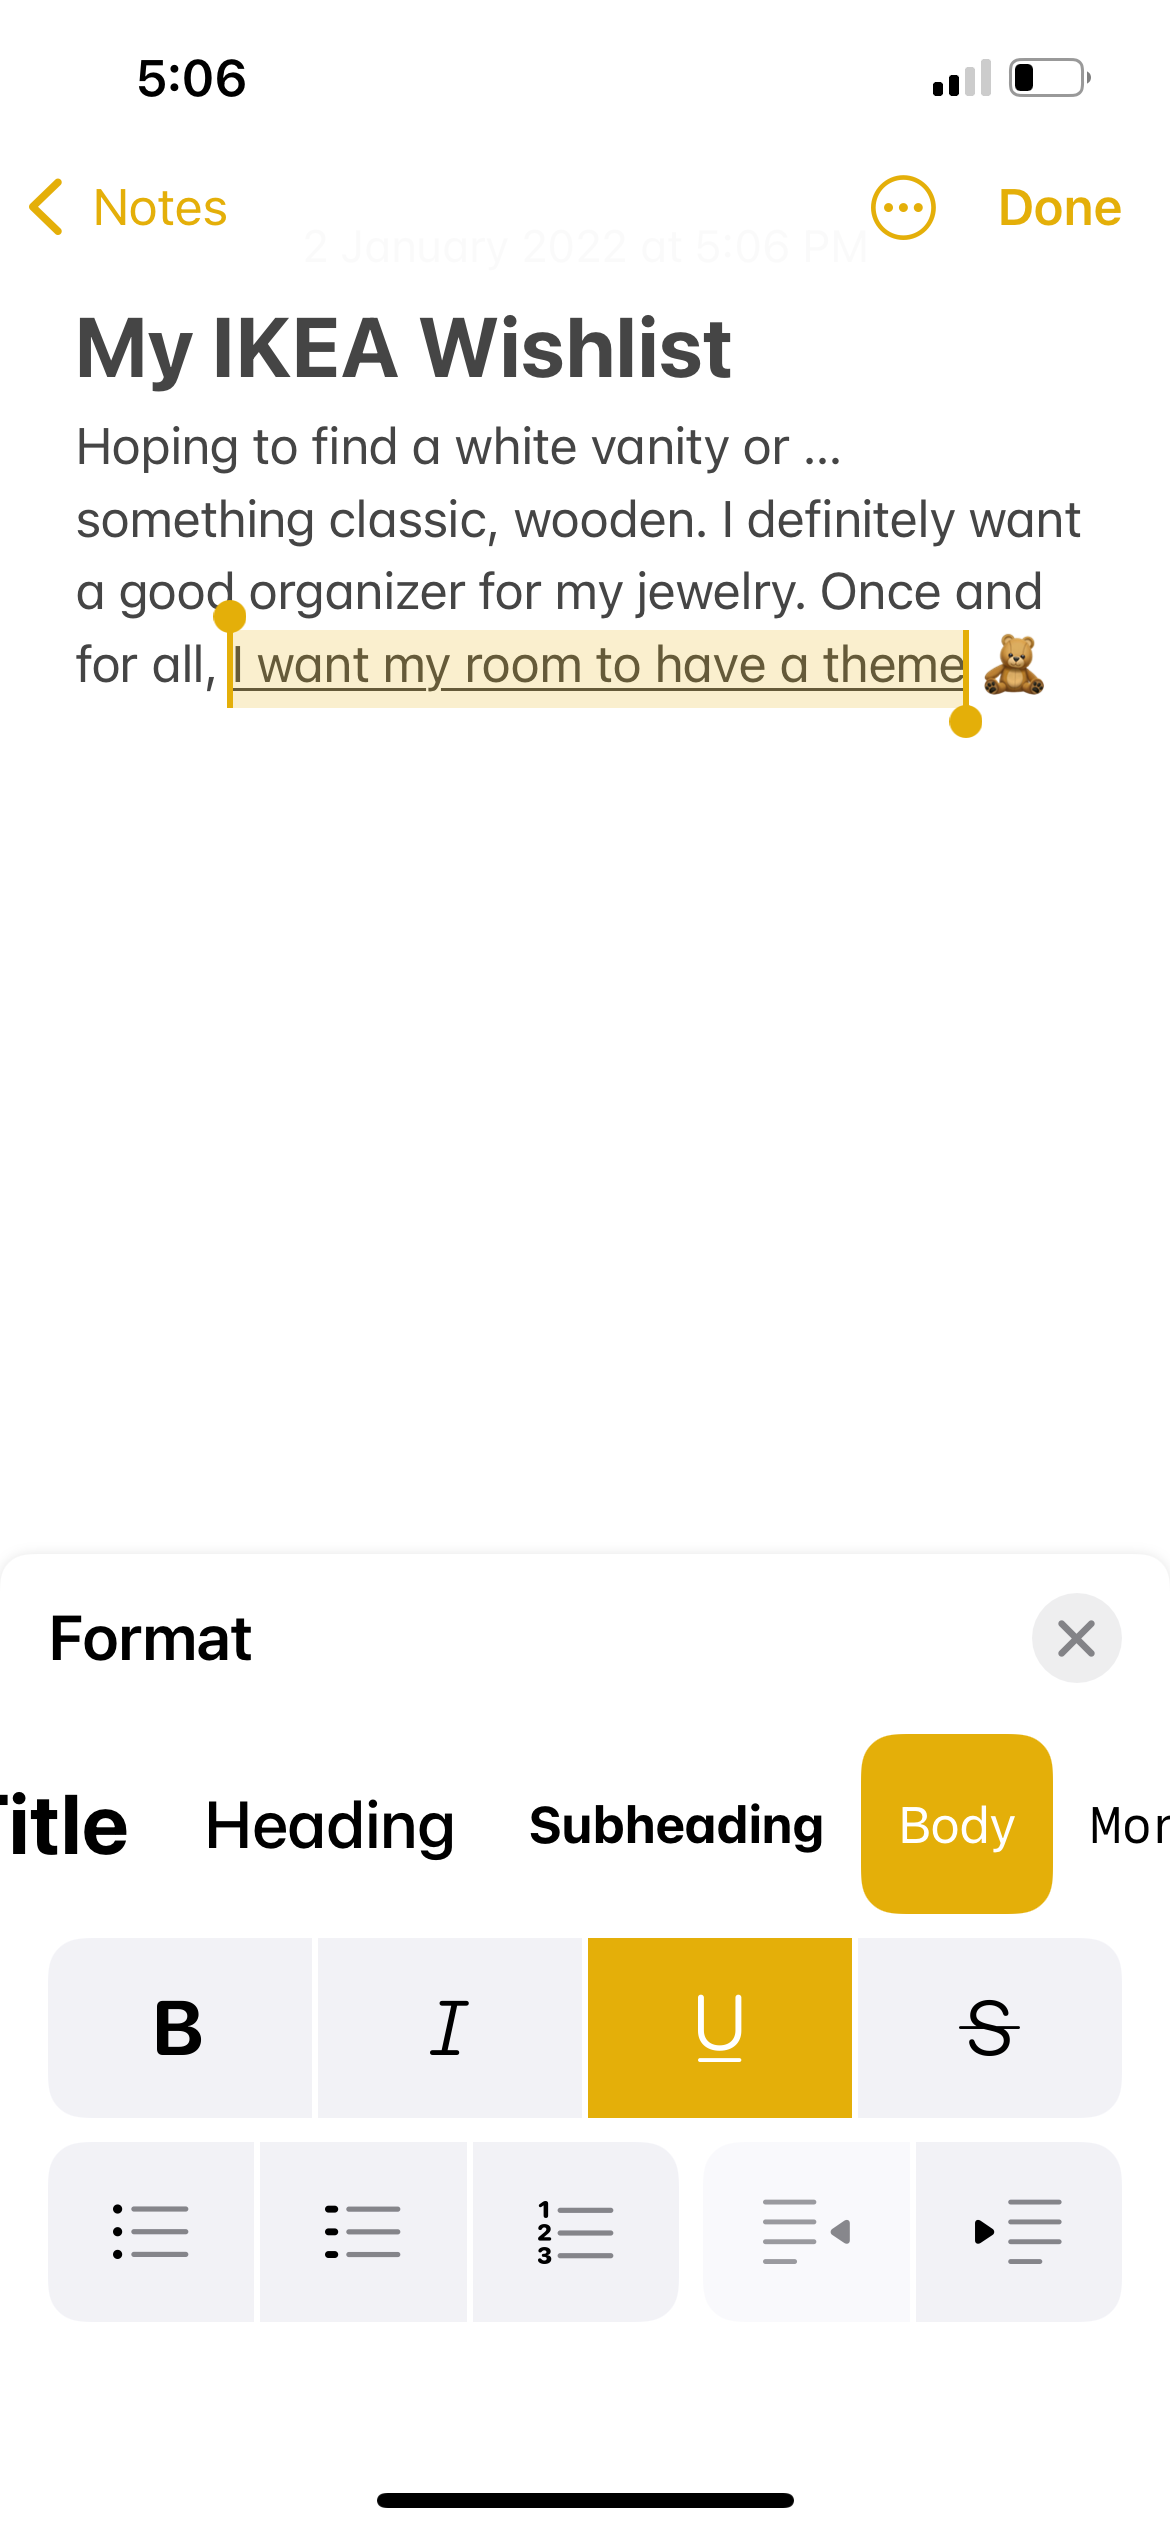 formatting text on iphone notes app